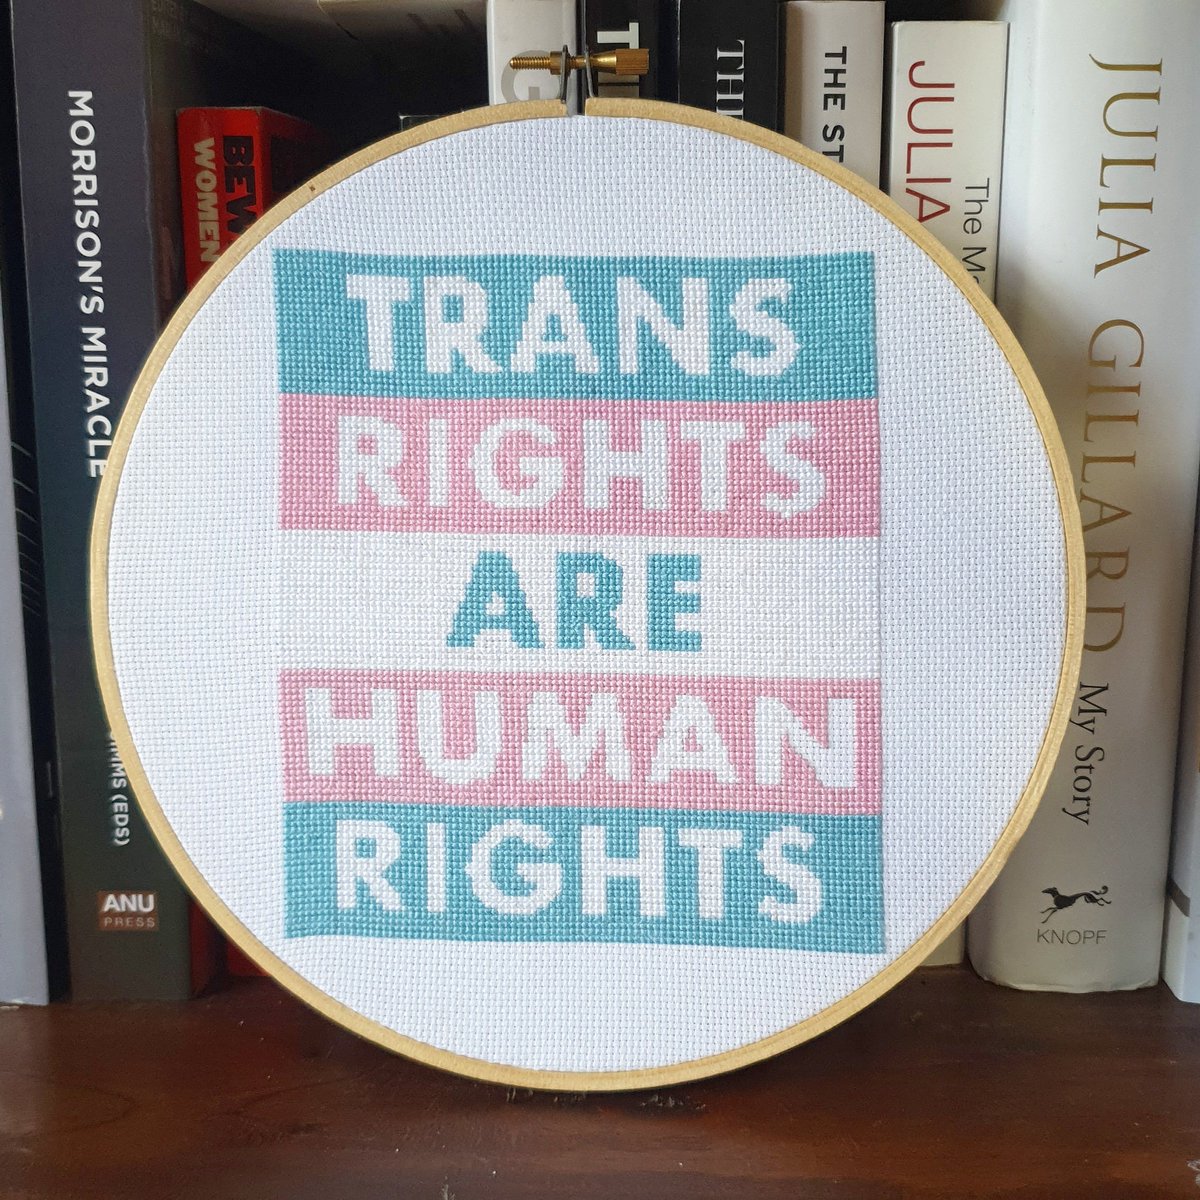 I'm beyond thrilled to share that my cross stitch piece, titled 'Trans Rights are Human Rights', will be featured in @agsa_adelaide's Radical Textiles exhibition!

Such an incredible showcase!

Also, does this officially make me an artist? 😅

#Craftivism #CrossStitch